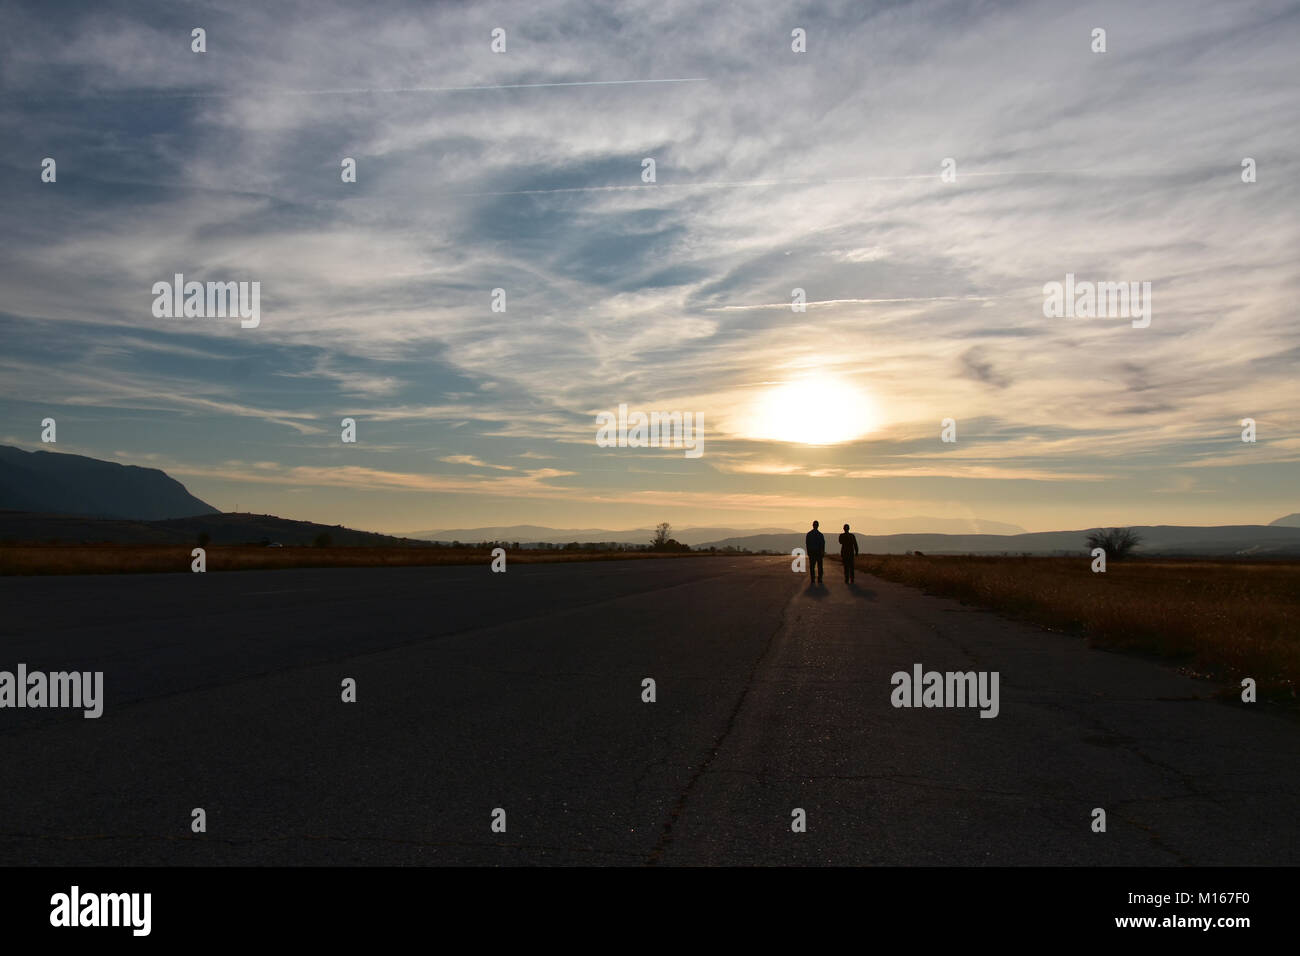 Sunset, flat valley, two people walking on a wide straight empty asphalt road towards the sun at the horizon Stock Photo